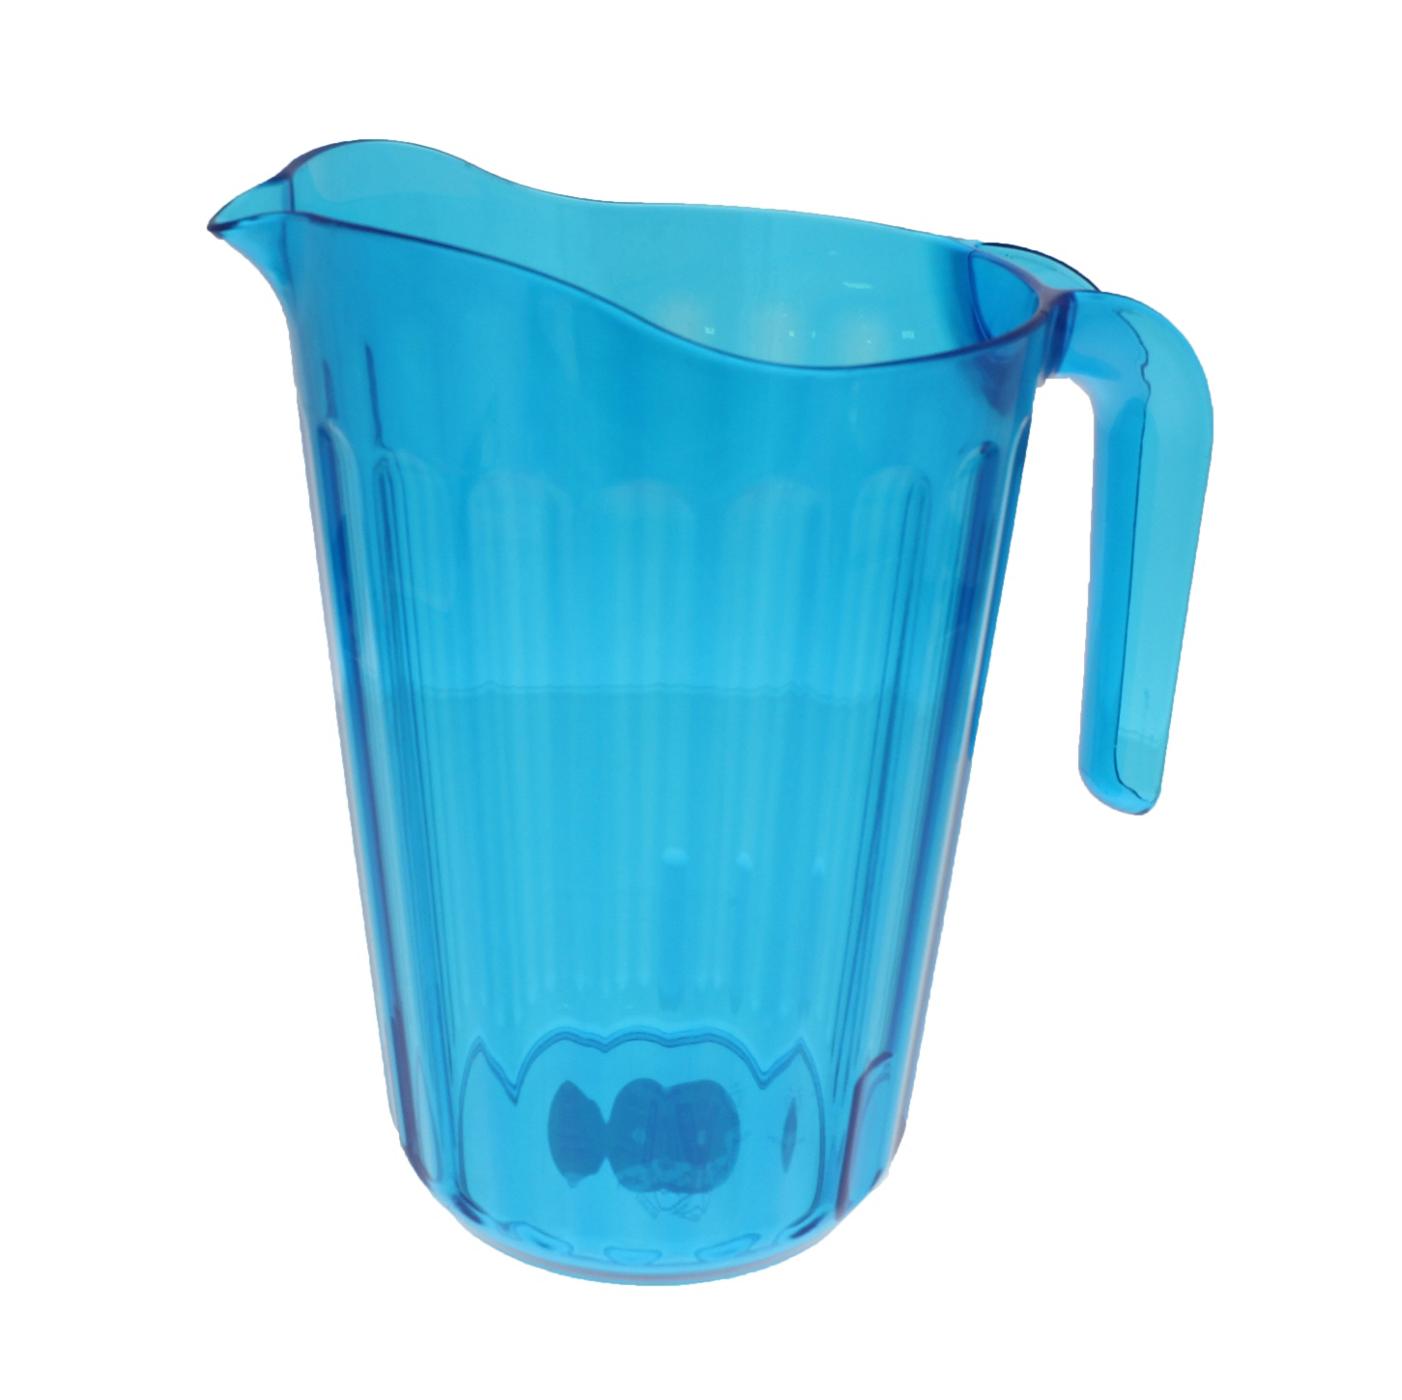 Arrow Plastic Stacking Pitcher, Colors May Vary; image 1 of 3